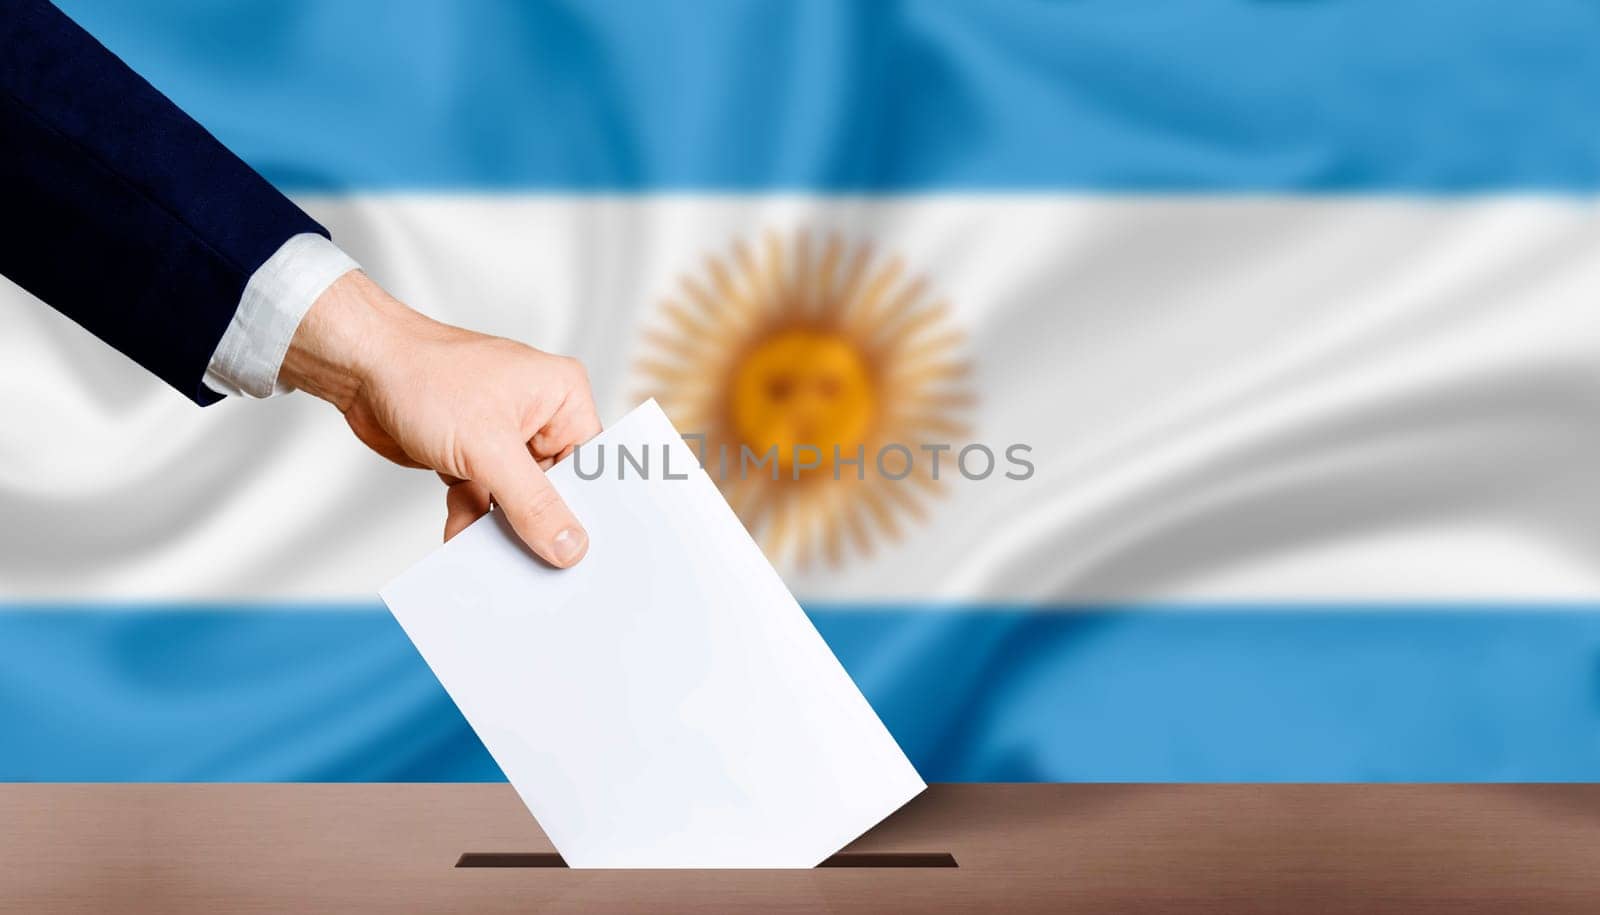 Hand holding ballot in voting ballot box with Argentina flag in background. Hand man puts ballot paper in voting box on Argentina flag background. Argentina electoral elections, concept by isaiphoto